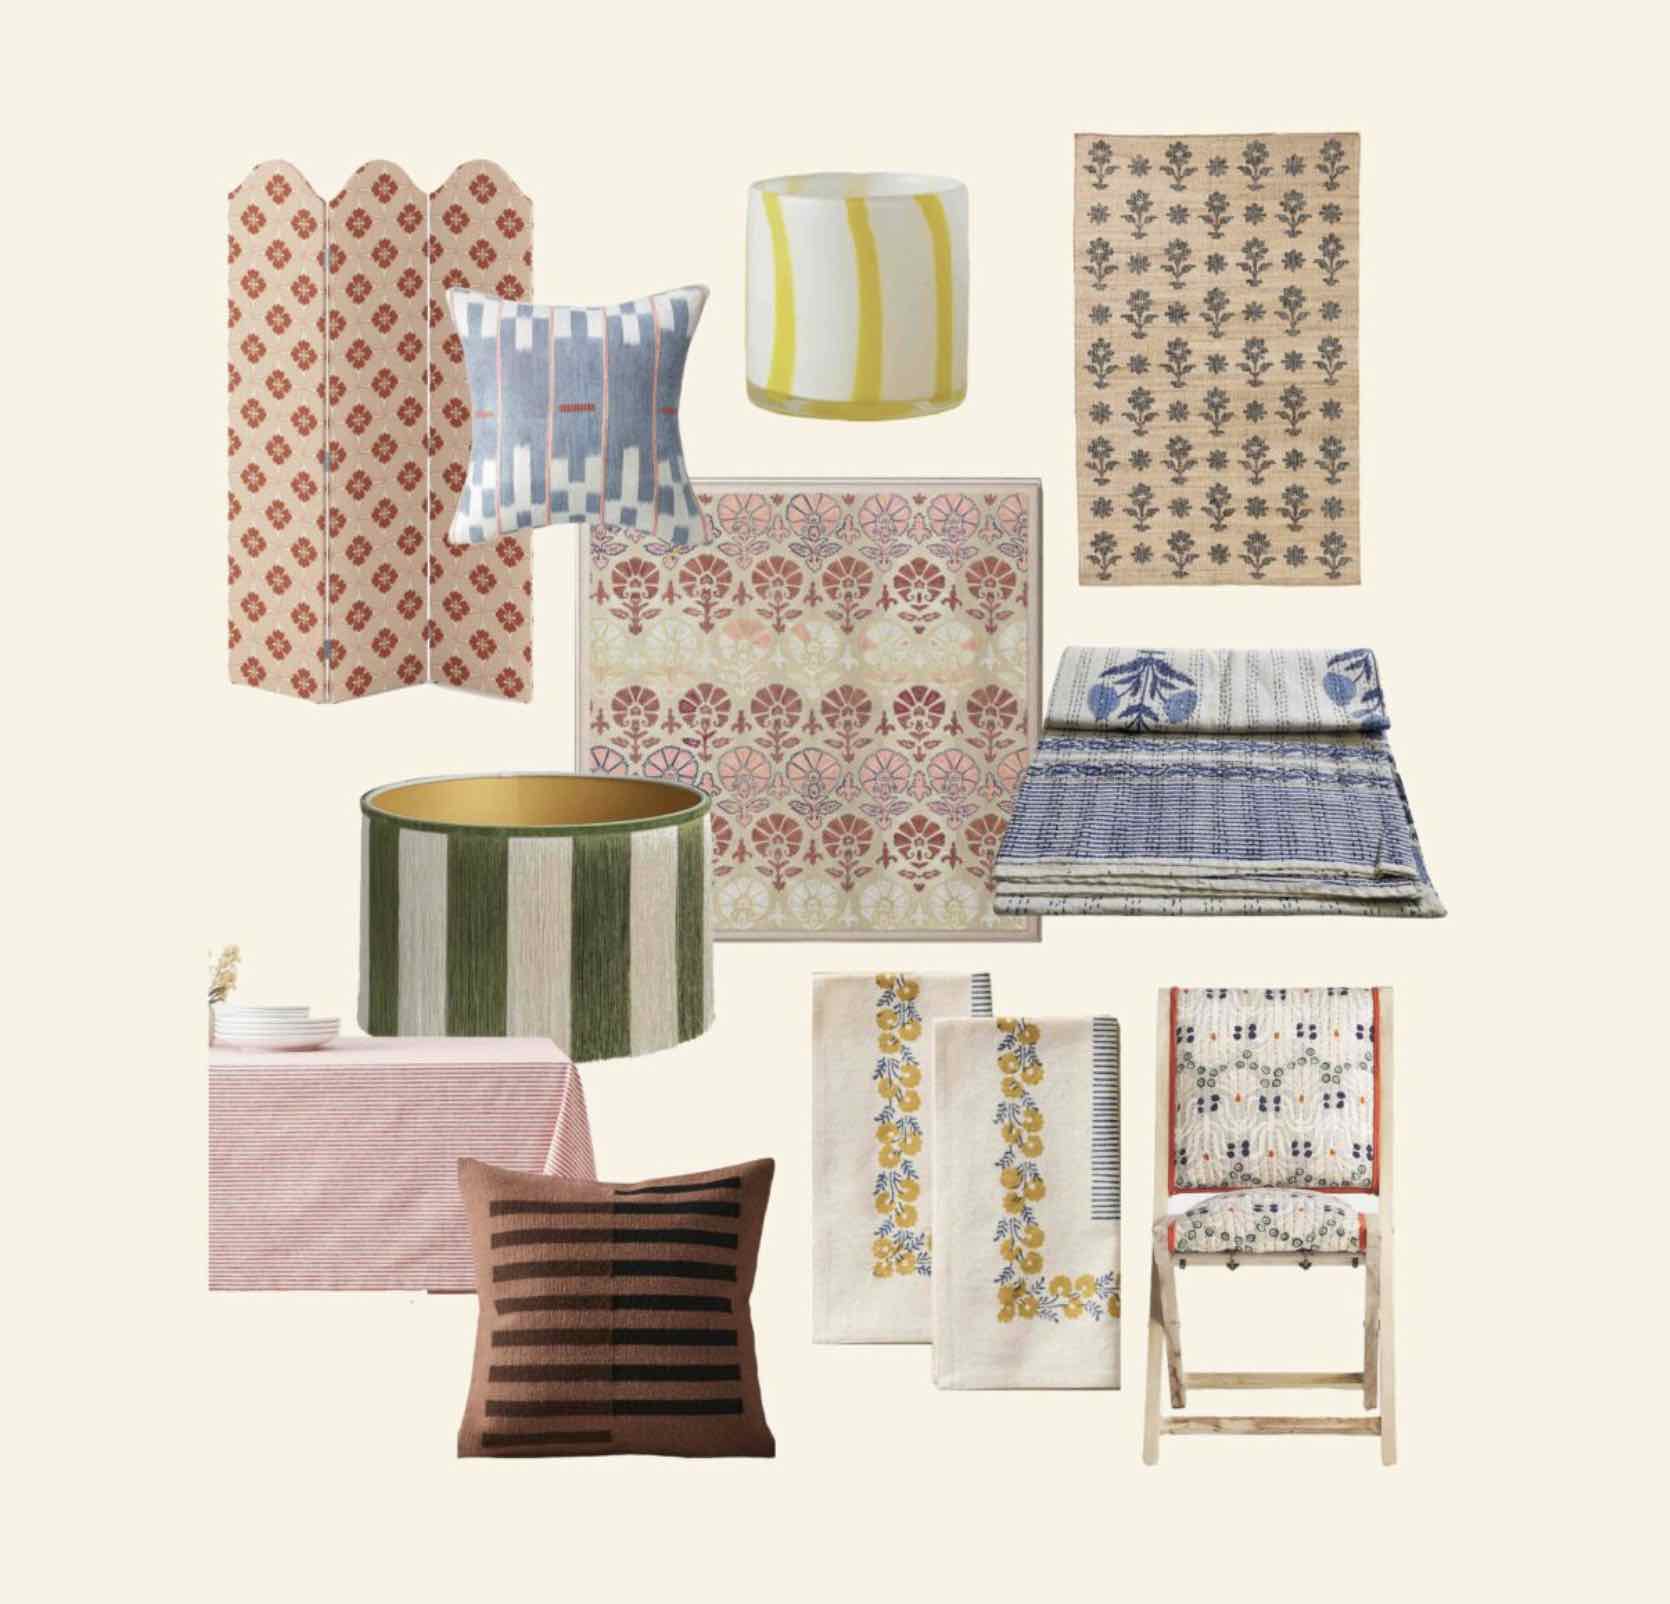 11 Patterned Products I’m Loving That Will Look Great in Any Home